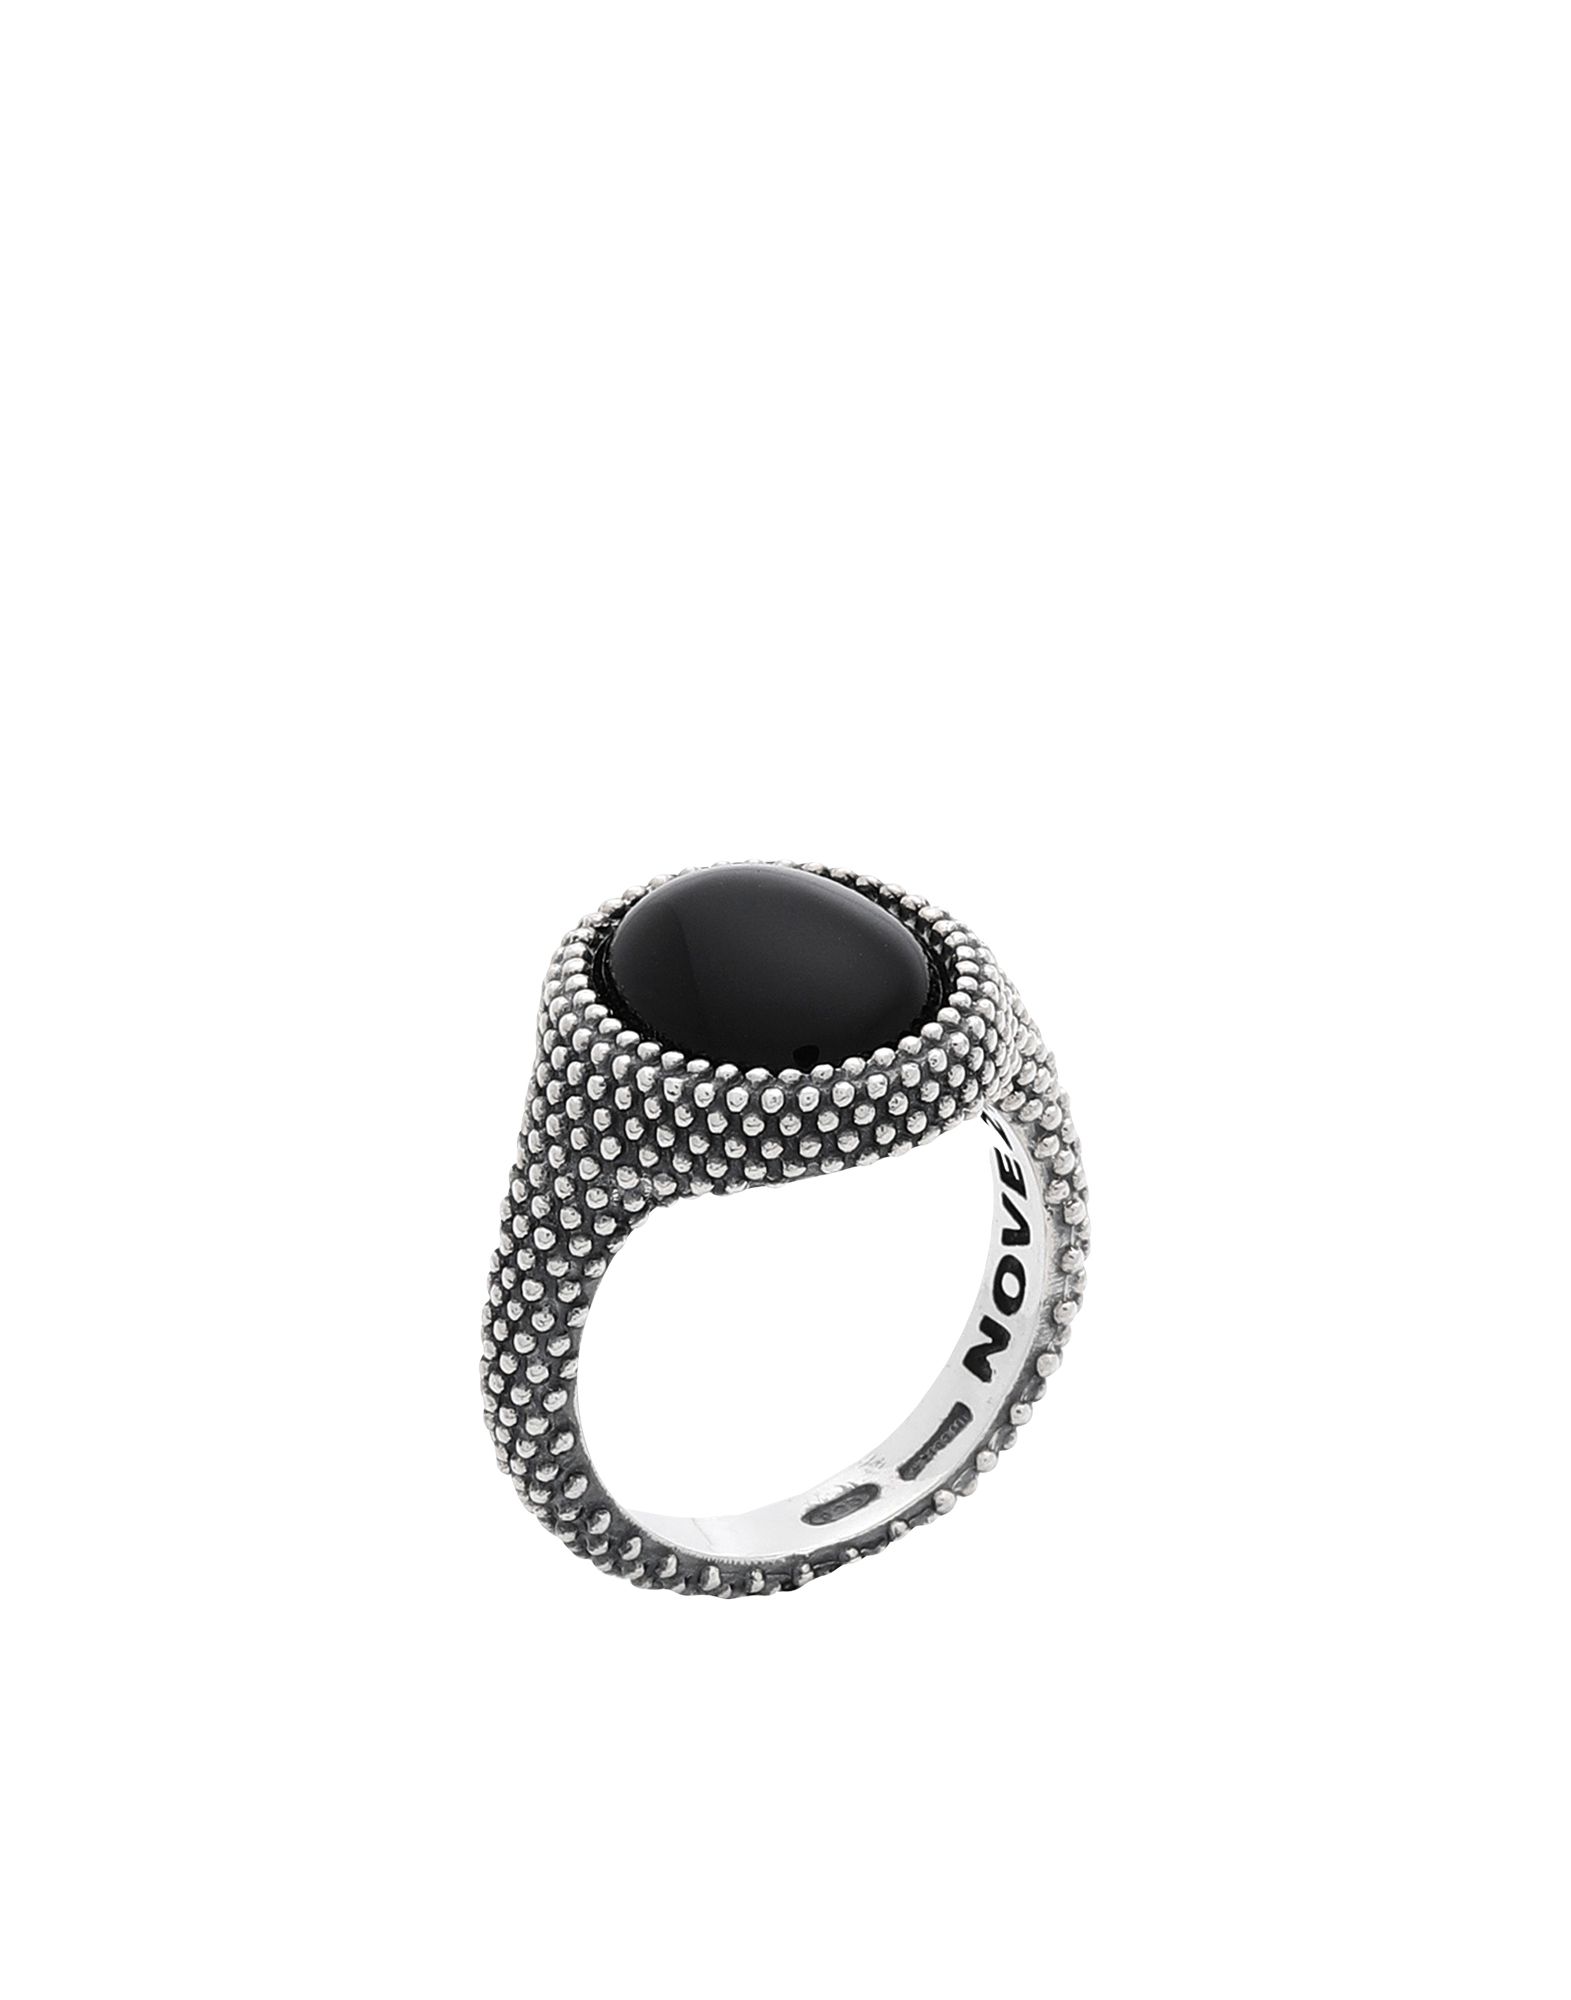 Shop Nove25 Oval Dotted Chevalier With Black Agate Man Ring Silver Size 4 925/1000 Silver, Agate